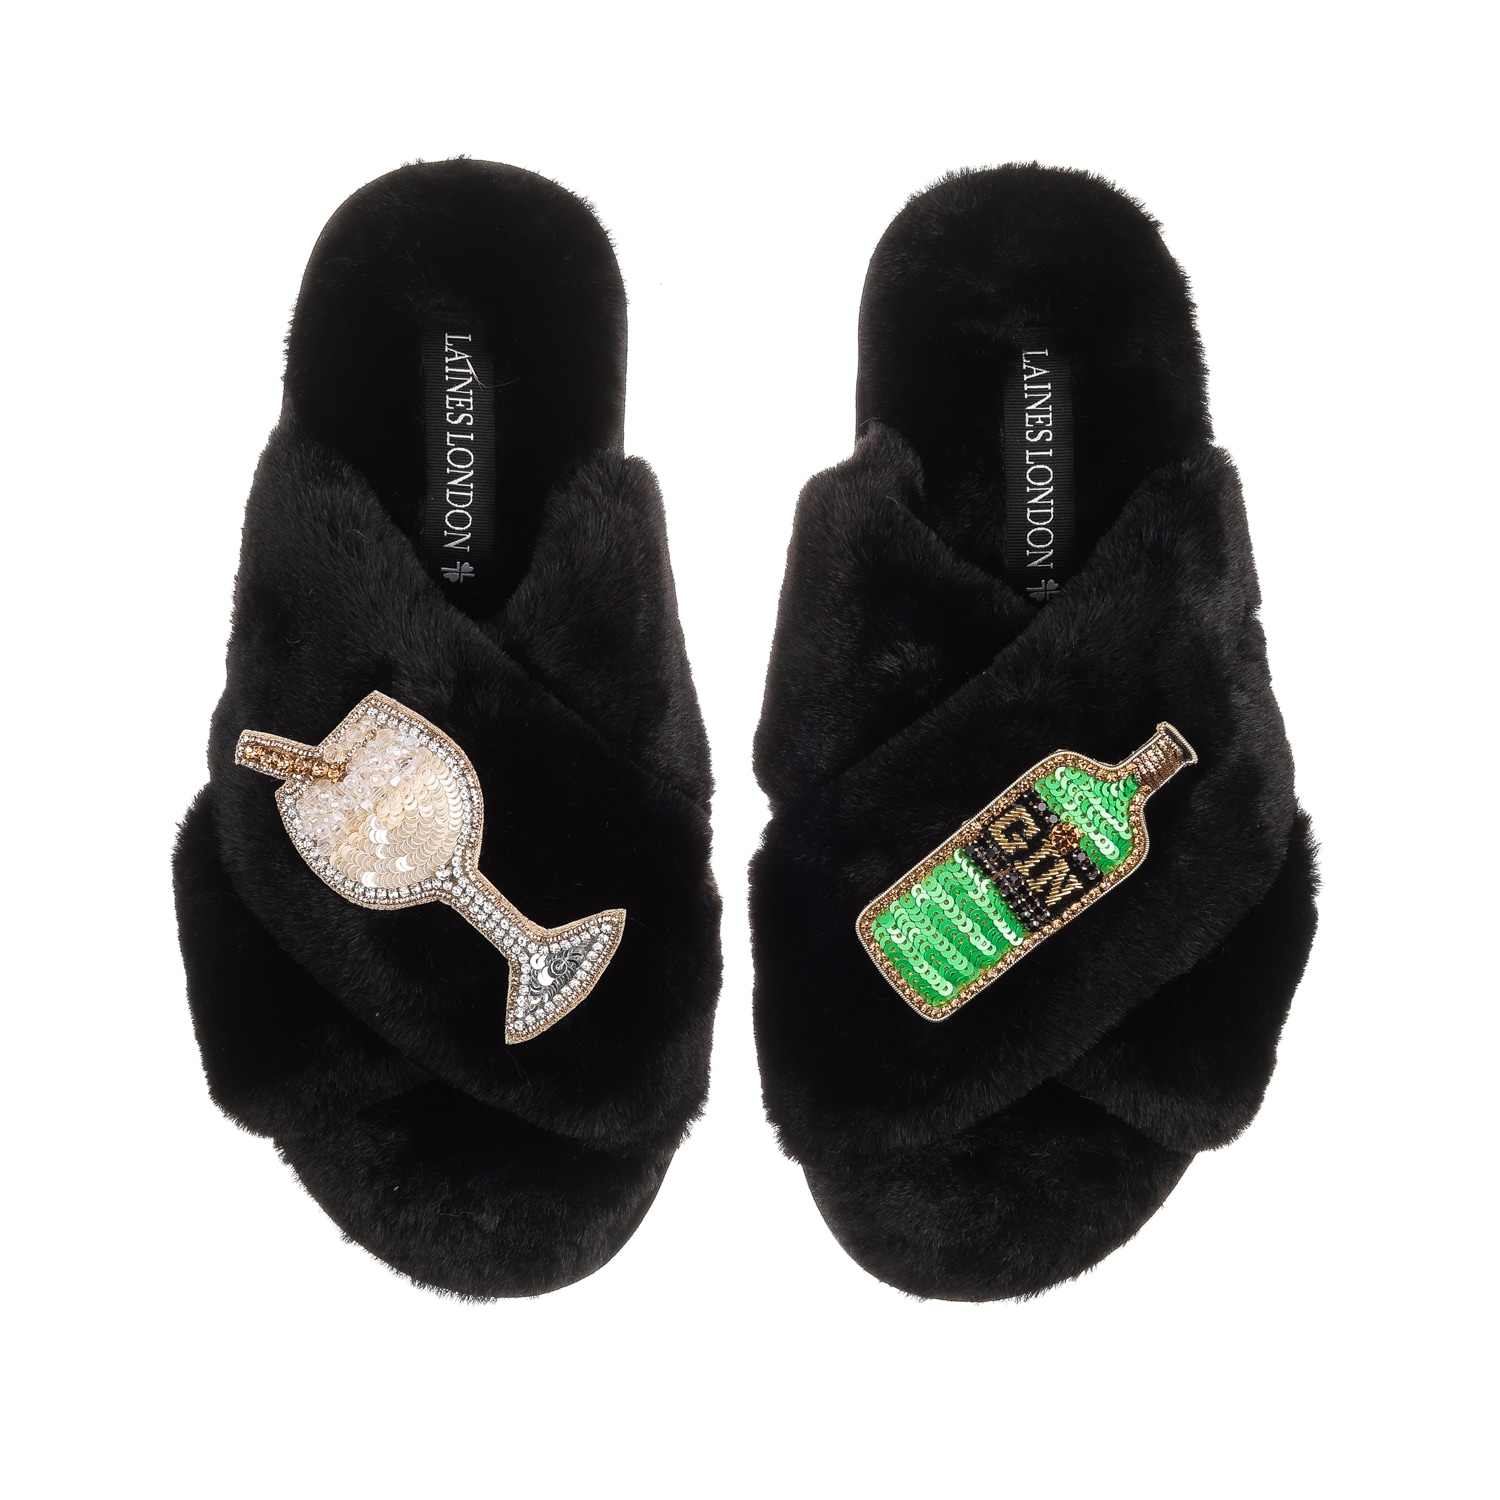 Women’s Classic Laines Slippers With Original Gin Brooches - Black Medium Laines London